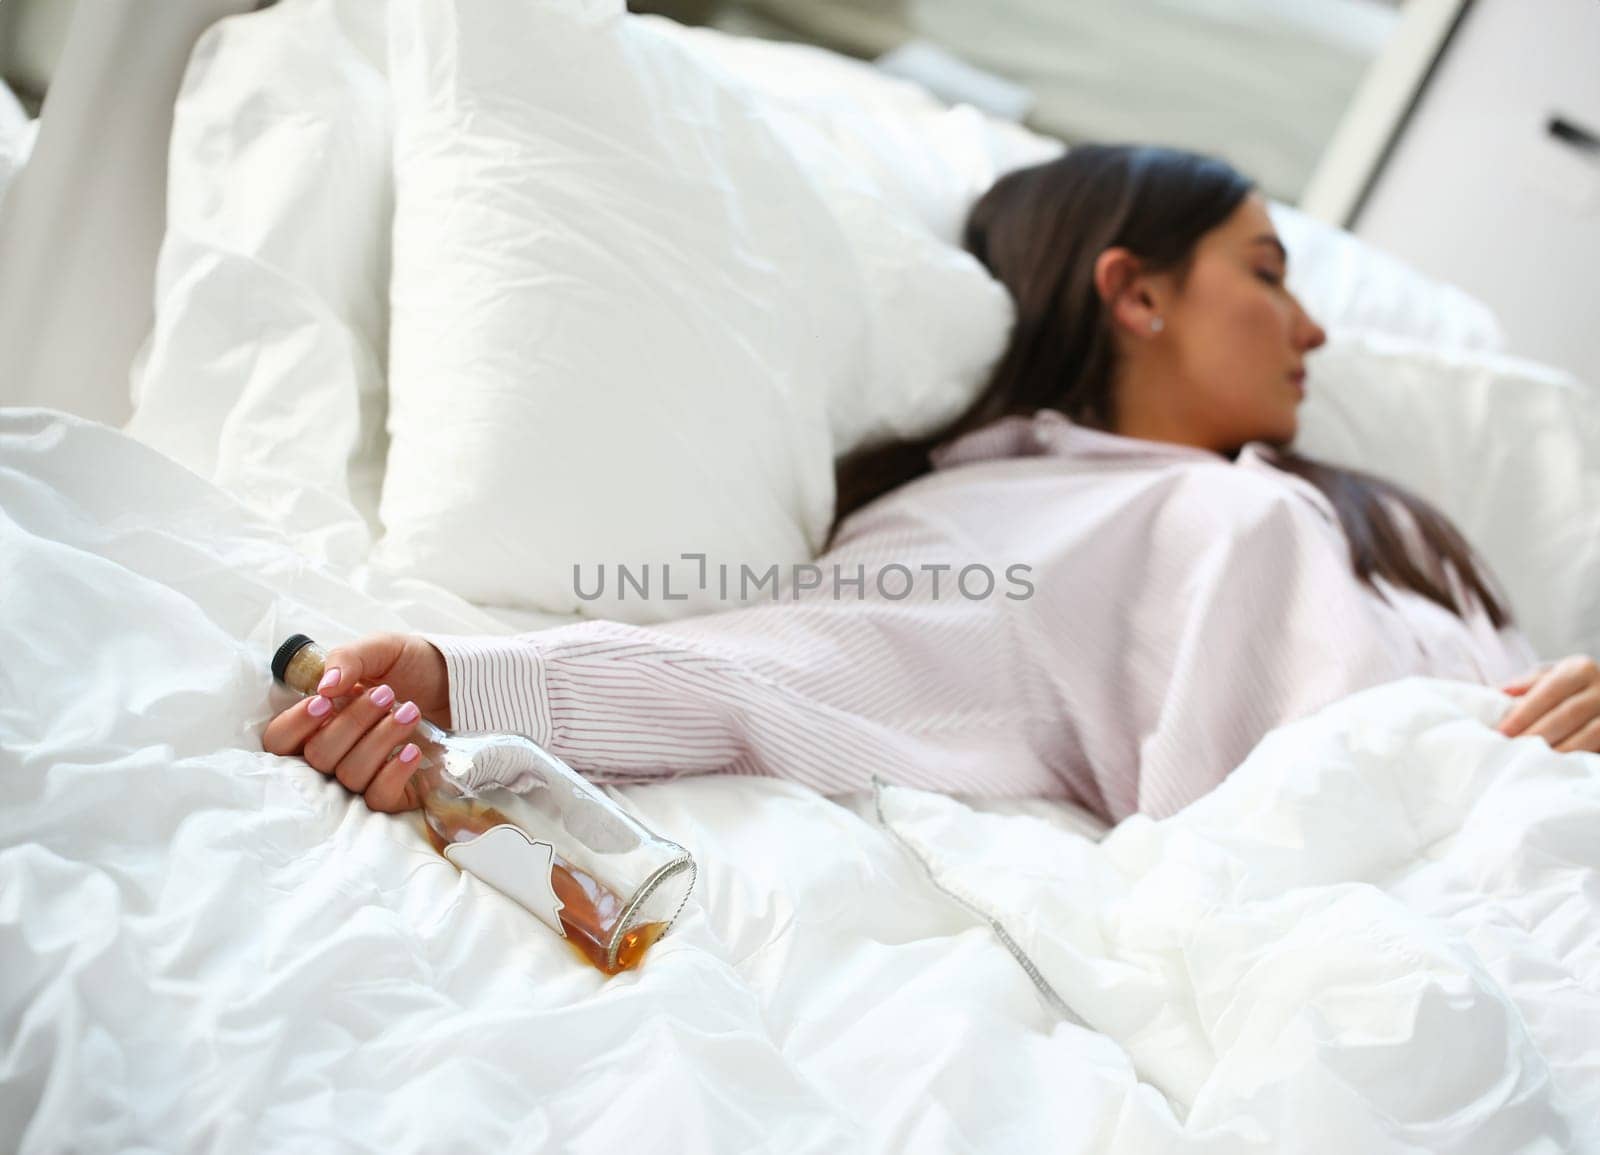 Young woman lying in bed deadly drunken holding near-empty bottle of booze. Female intoxicated with alcohol after tough night party. Alcoholism habitual drunkenness pernicious habit concept